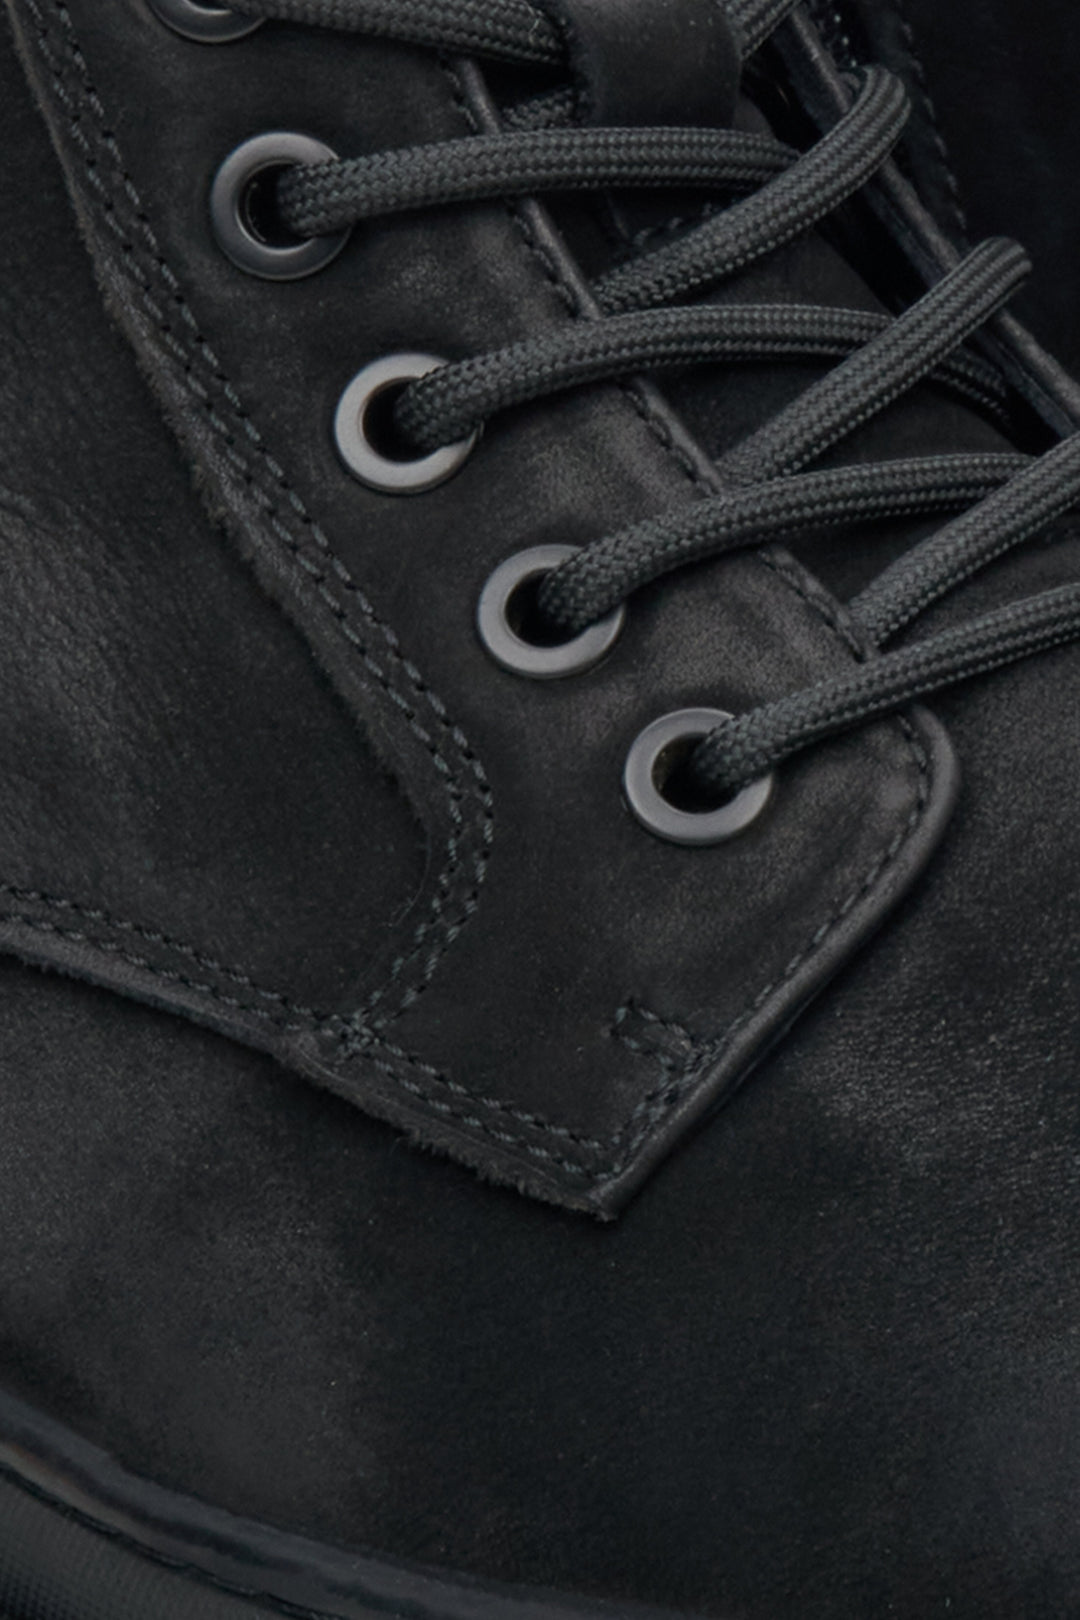 Men's black boots by Estro made of genuine nubuck - close-up on details.